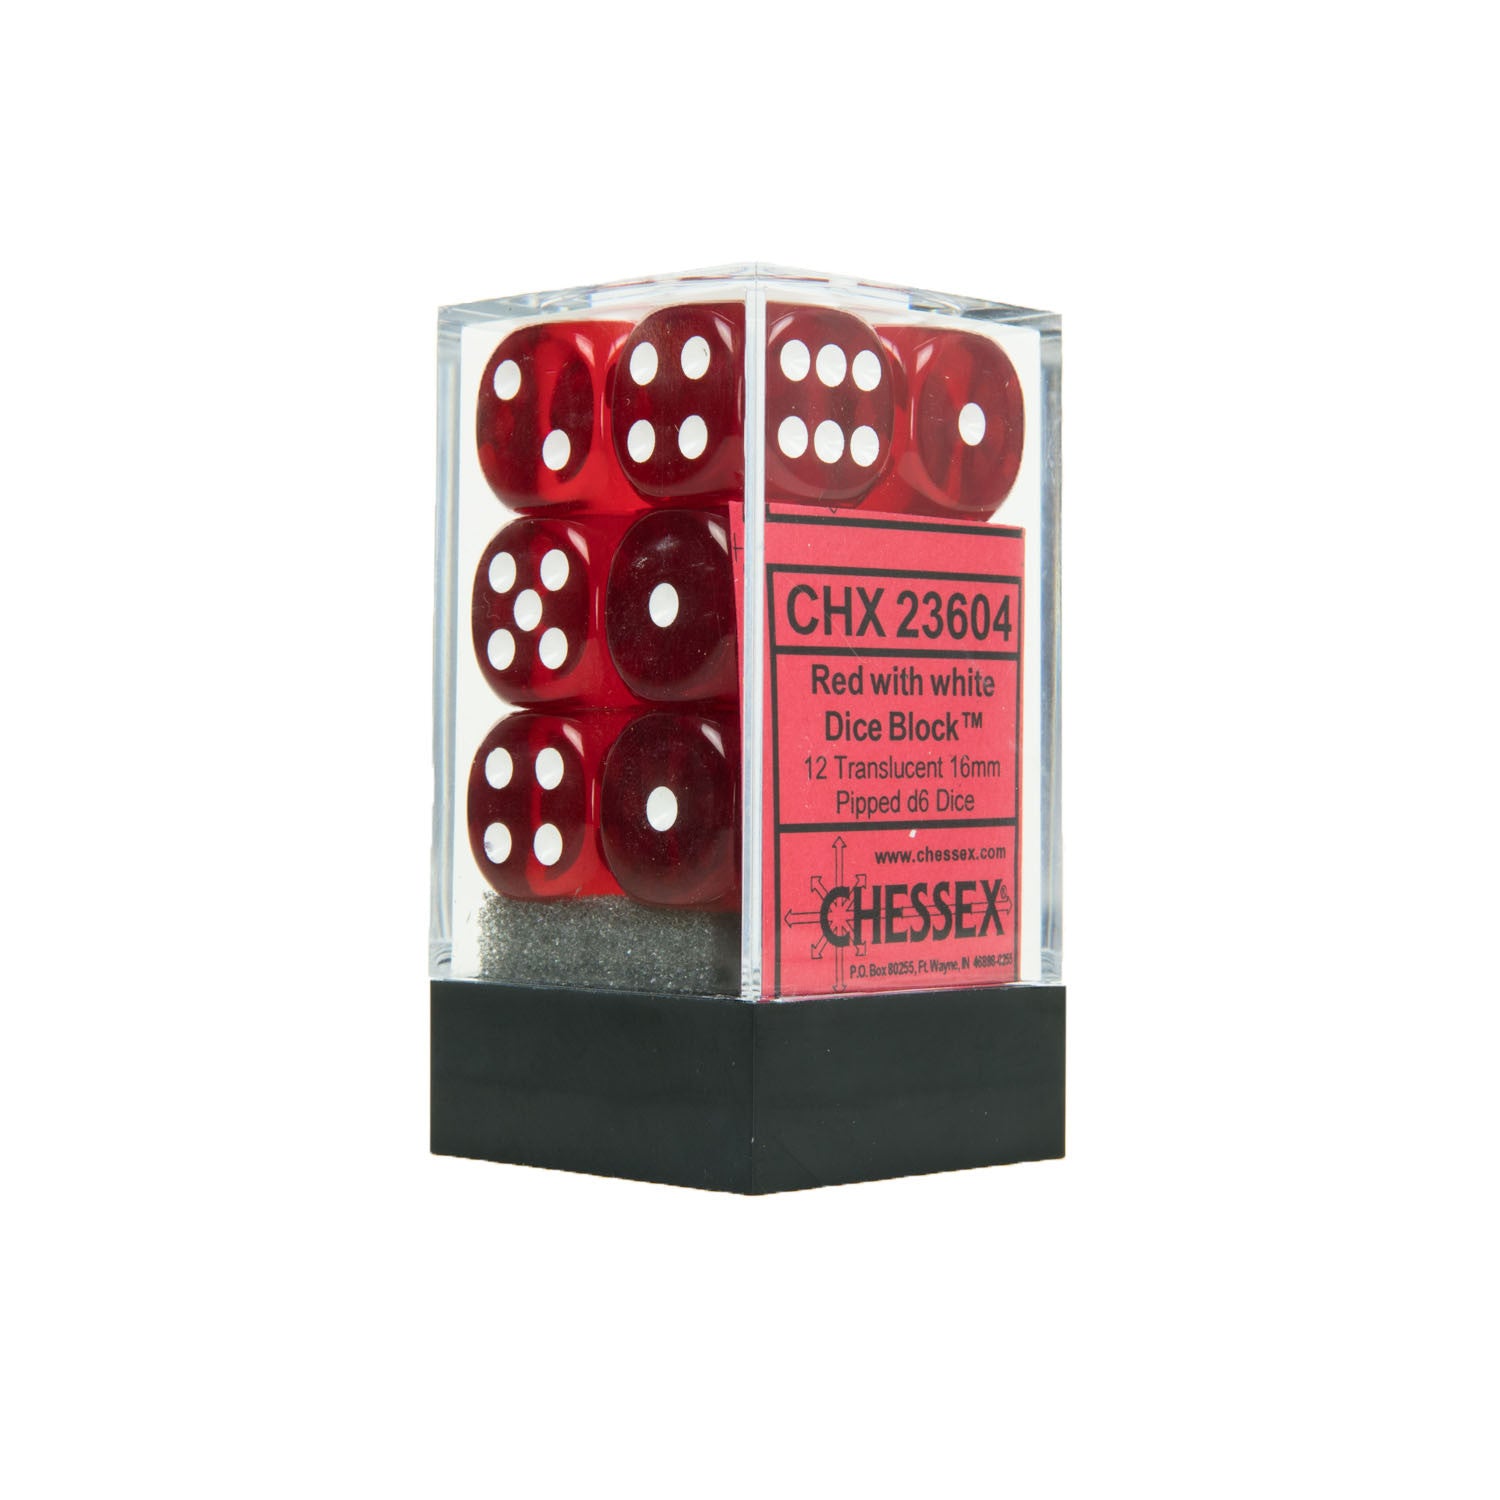 Chessex CHX23604 12 Red w/ white Translucent 16mm d6 Dice